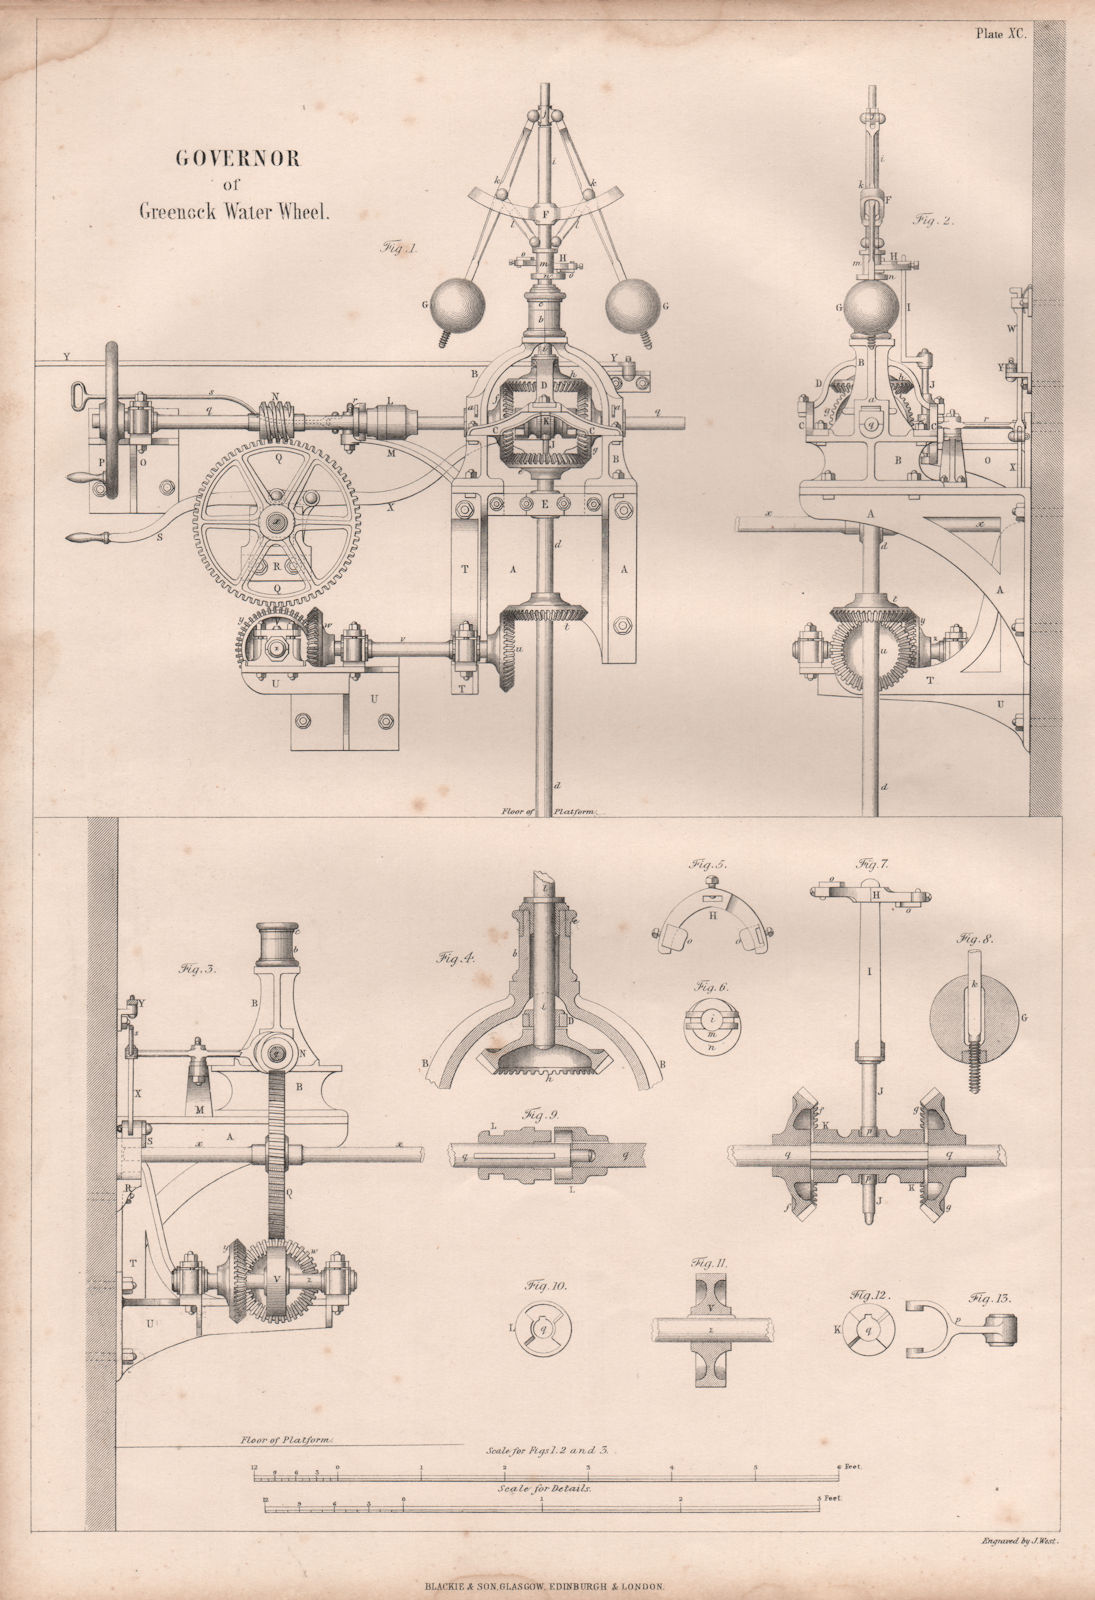 VICTORIAN ENGINEERING DRAWING. Governor of Greenock water wheel 1847 old print